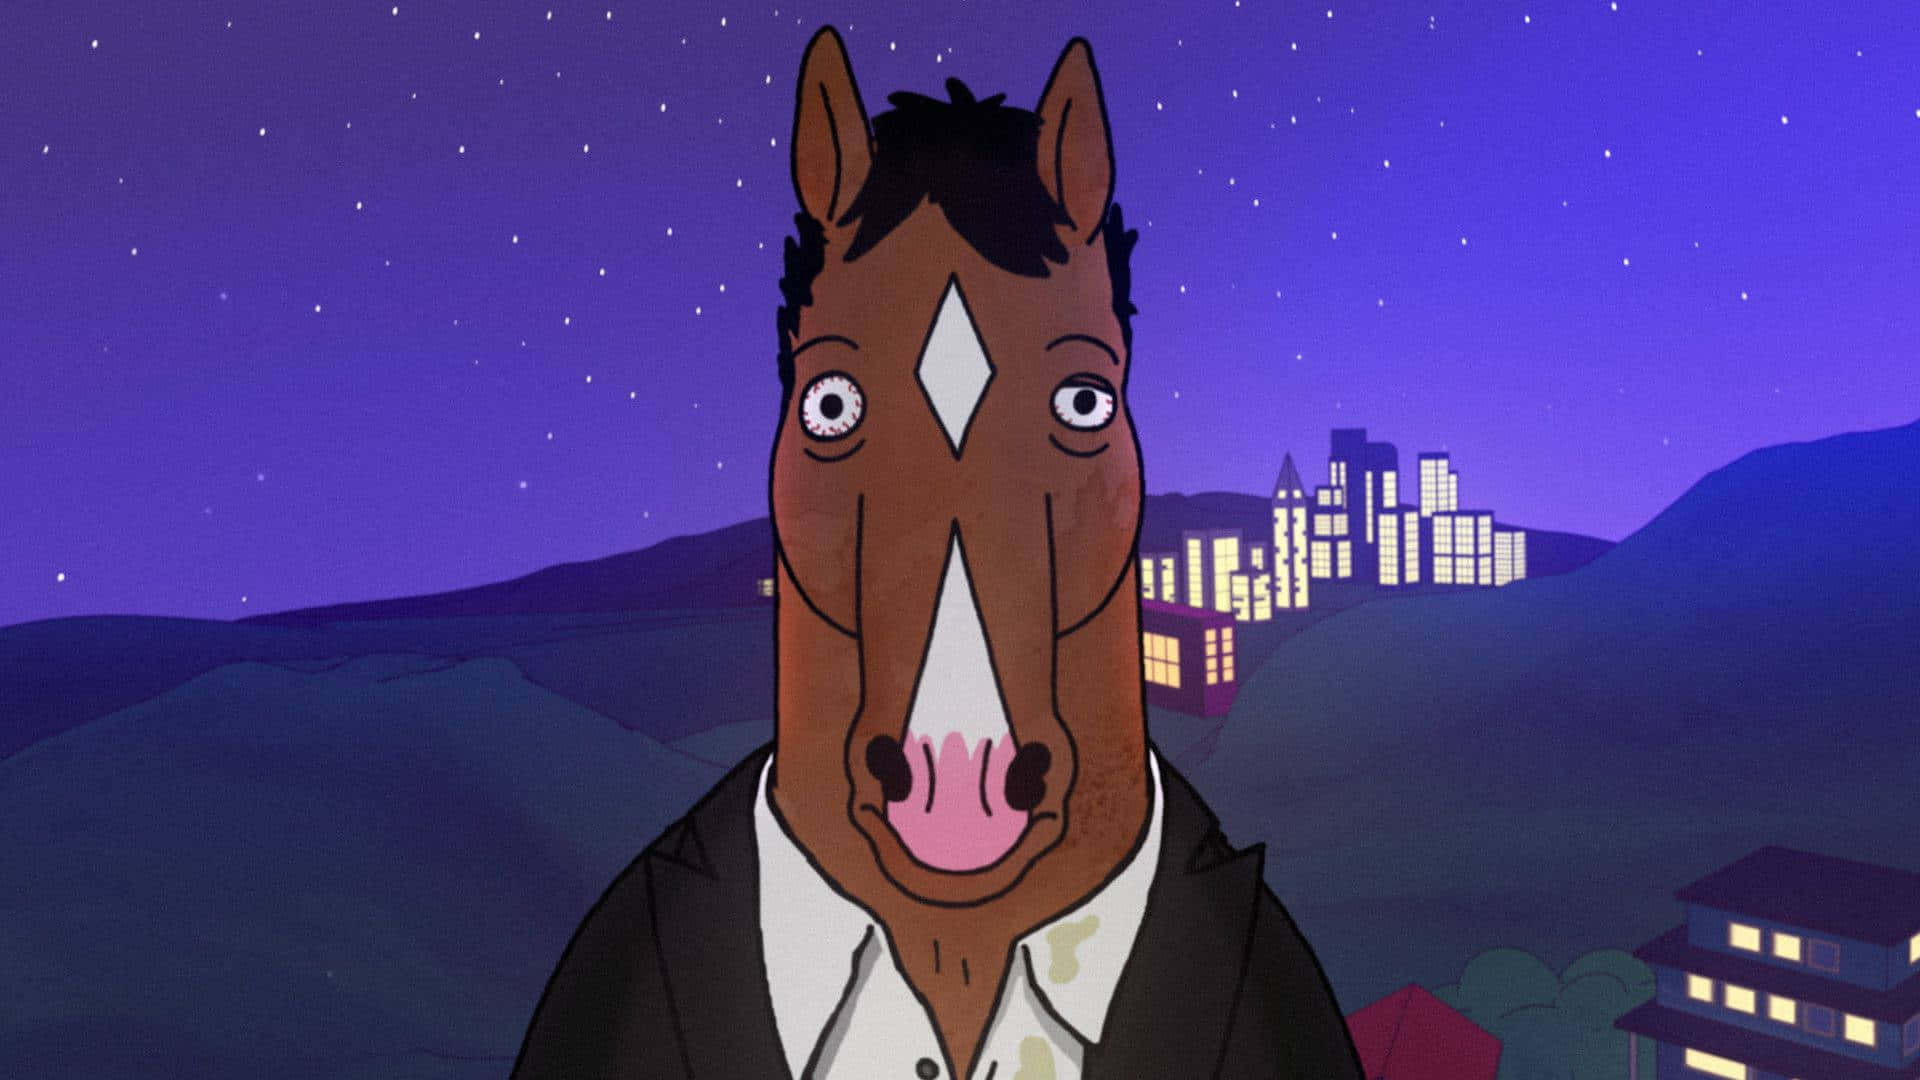 Bojack Horseman - "There's always gonna be another mountain. I'm always gonna wanna make it move. Always gonna be a uphill battle, Sometimes I'm gonna have to lose."